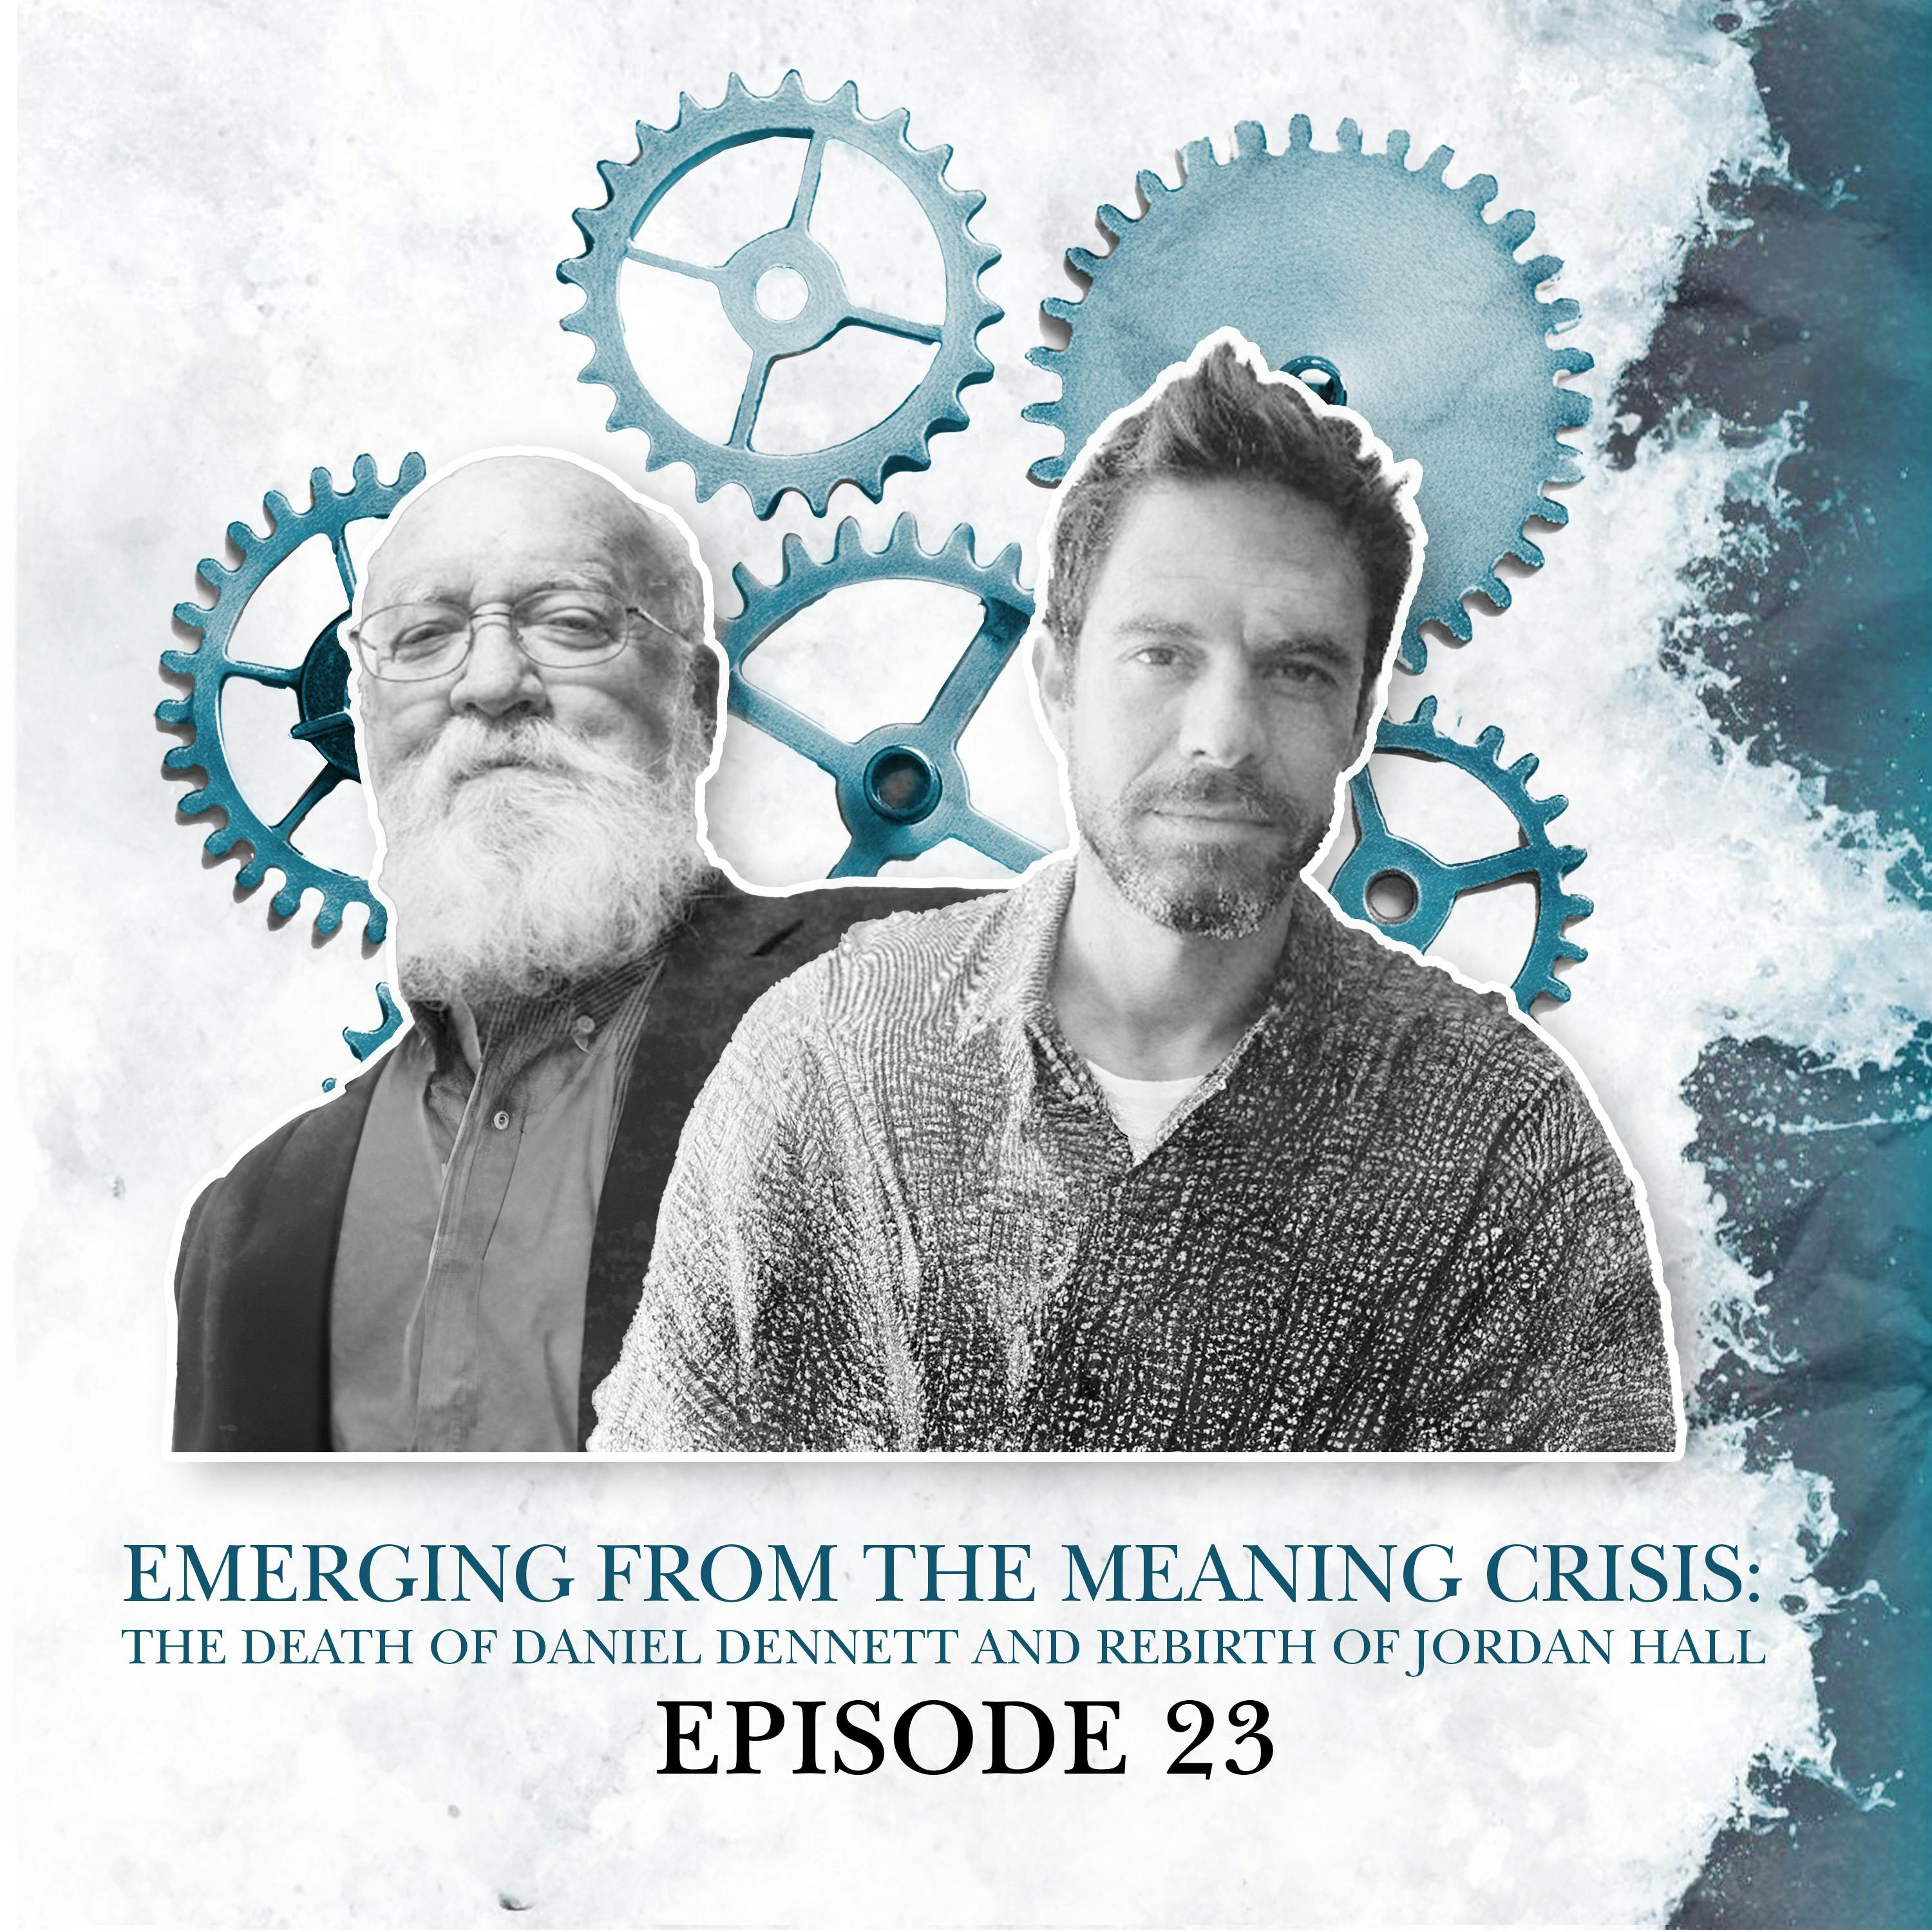 23. Emerging from the Meaning Crisis: The death of Daniel Dennett and rebirth of Jordan Hall